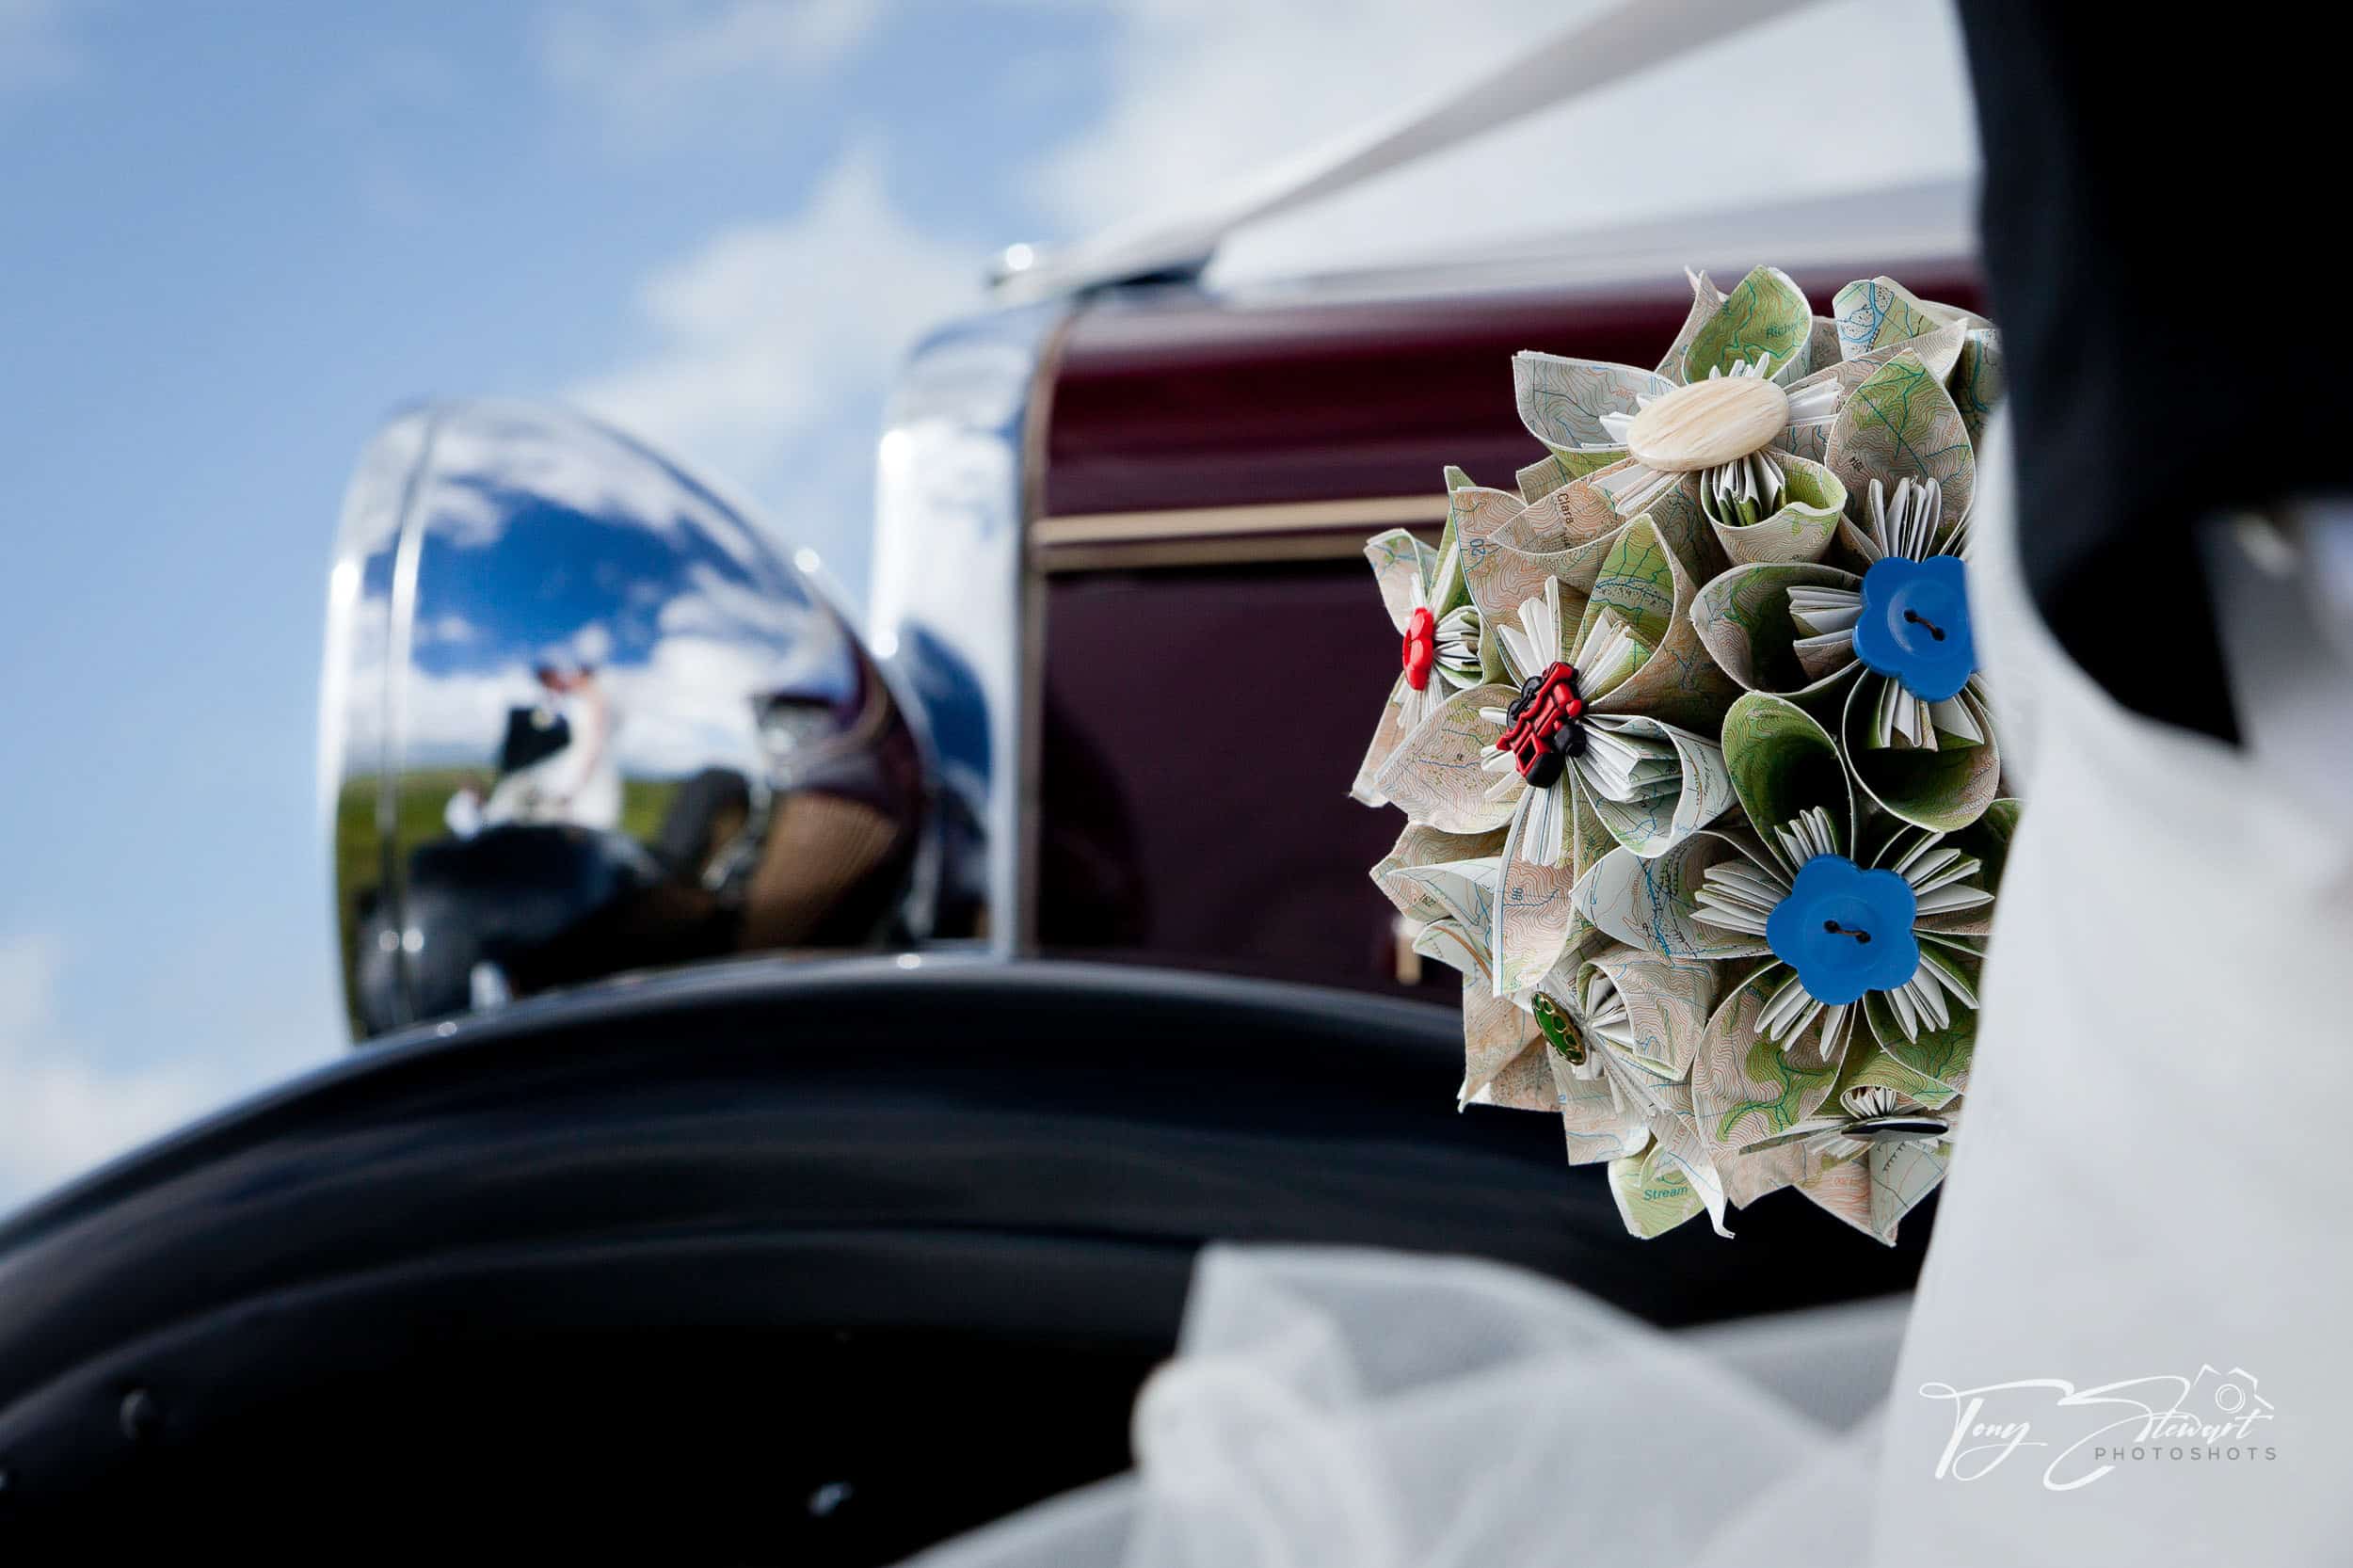 Bridal couple partly obscured seen in reflection of vintage car headlight holding holding a bouquet of paper flowers.